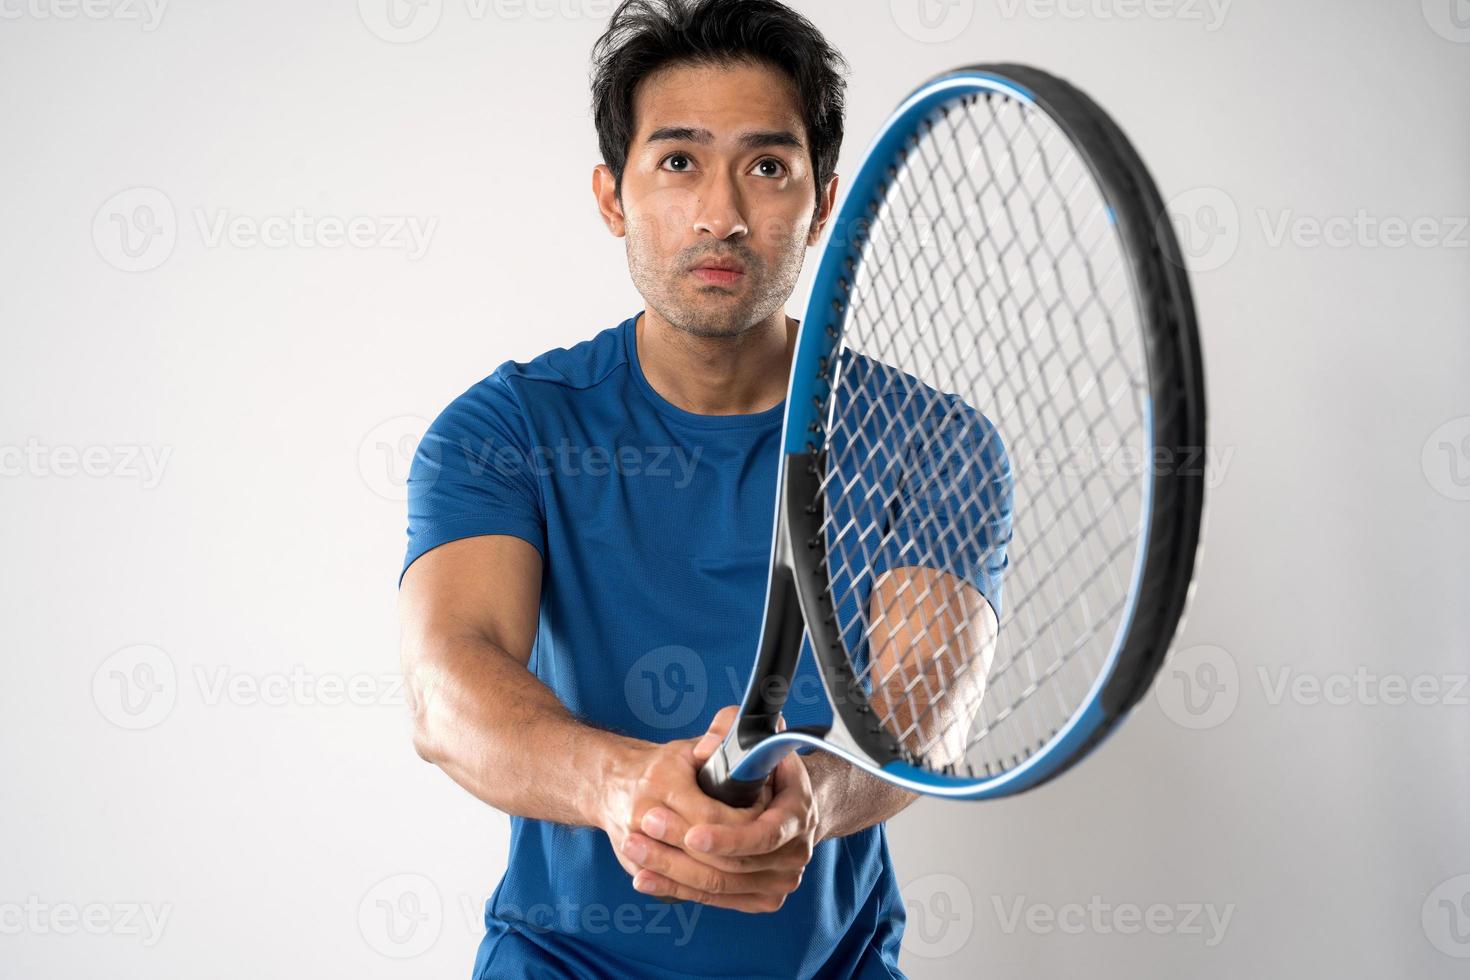 A male tennis player holding a tennis racket with a determined expression and eyes on a white background. photo